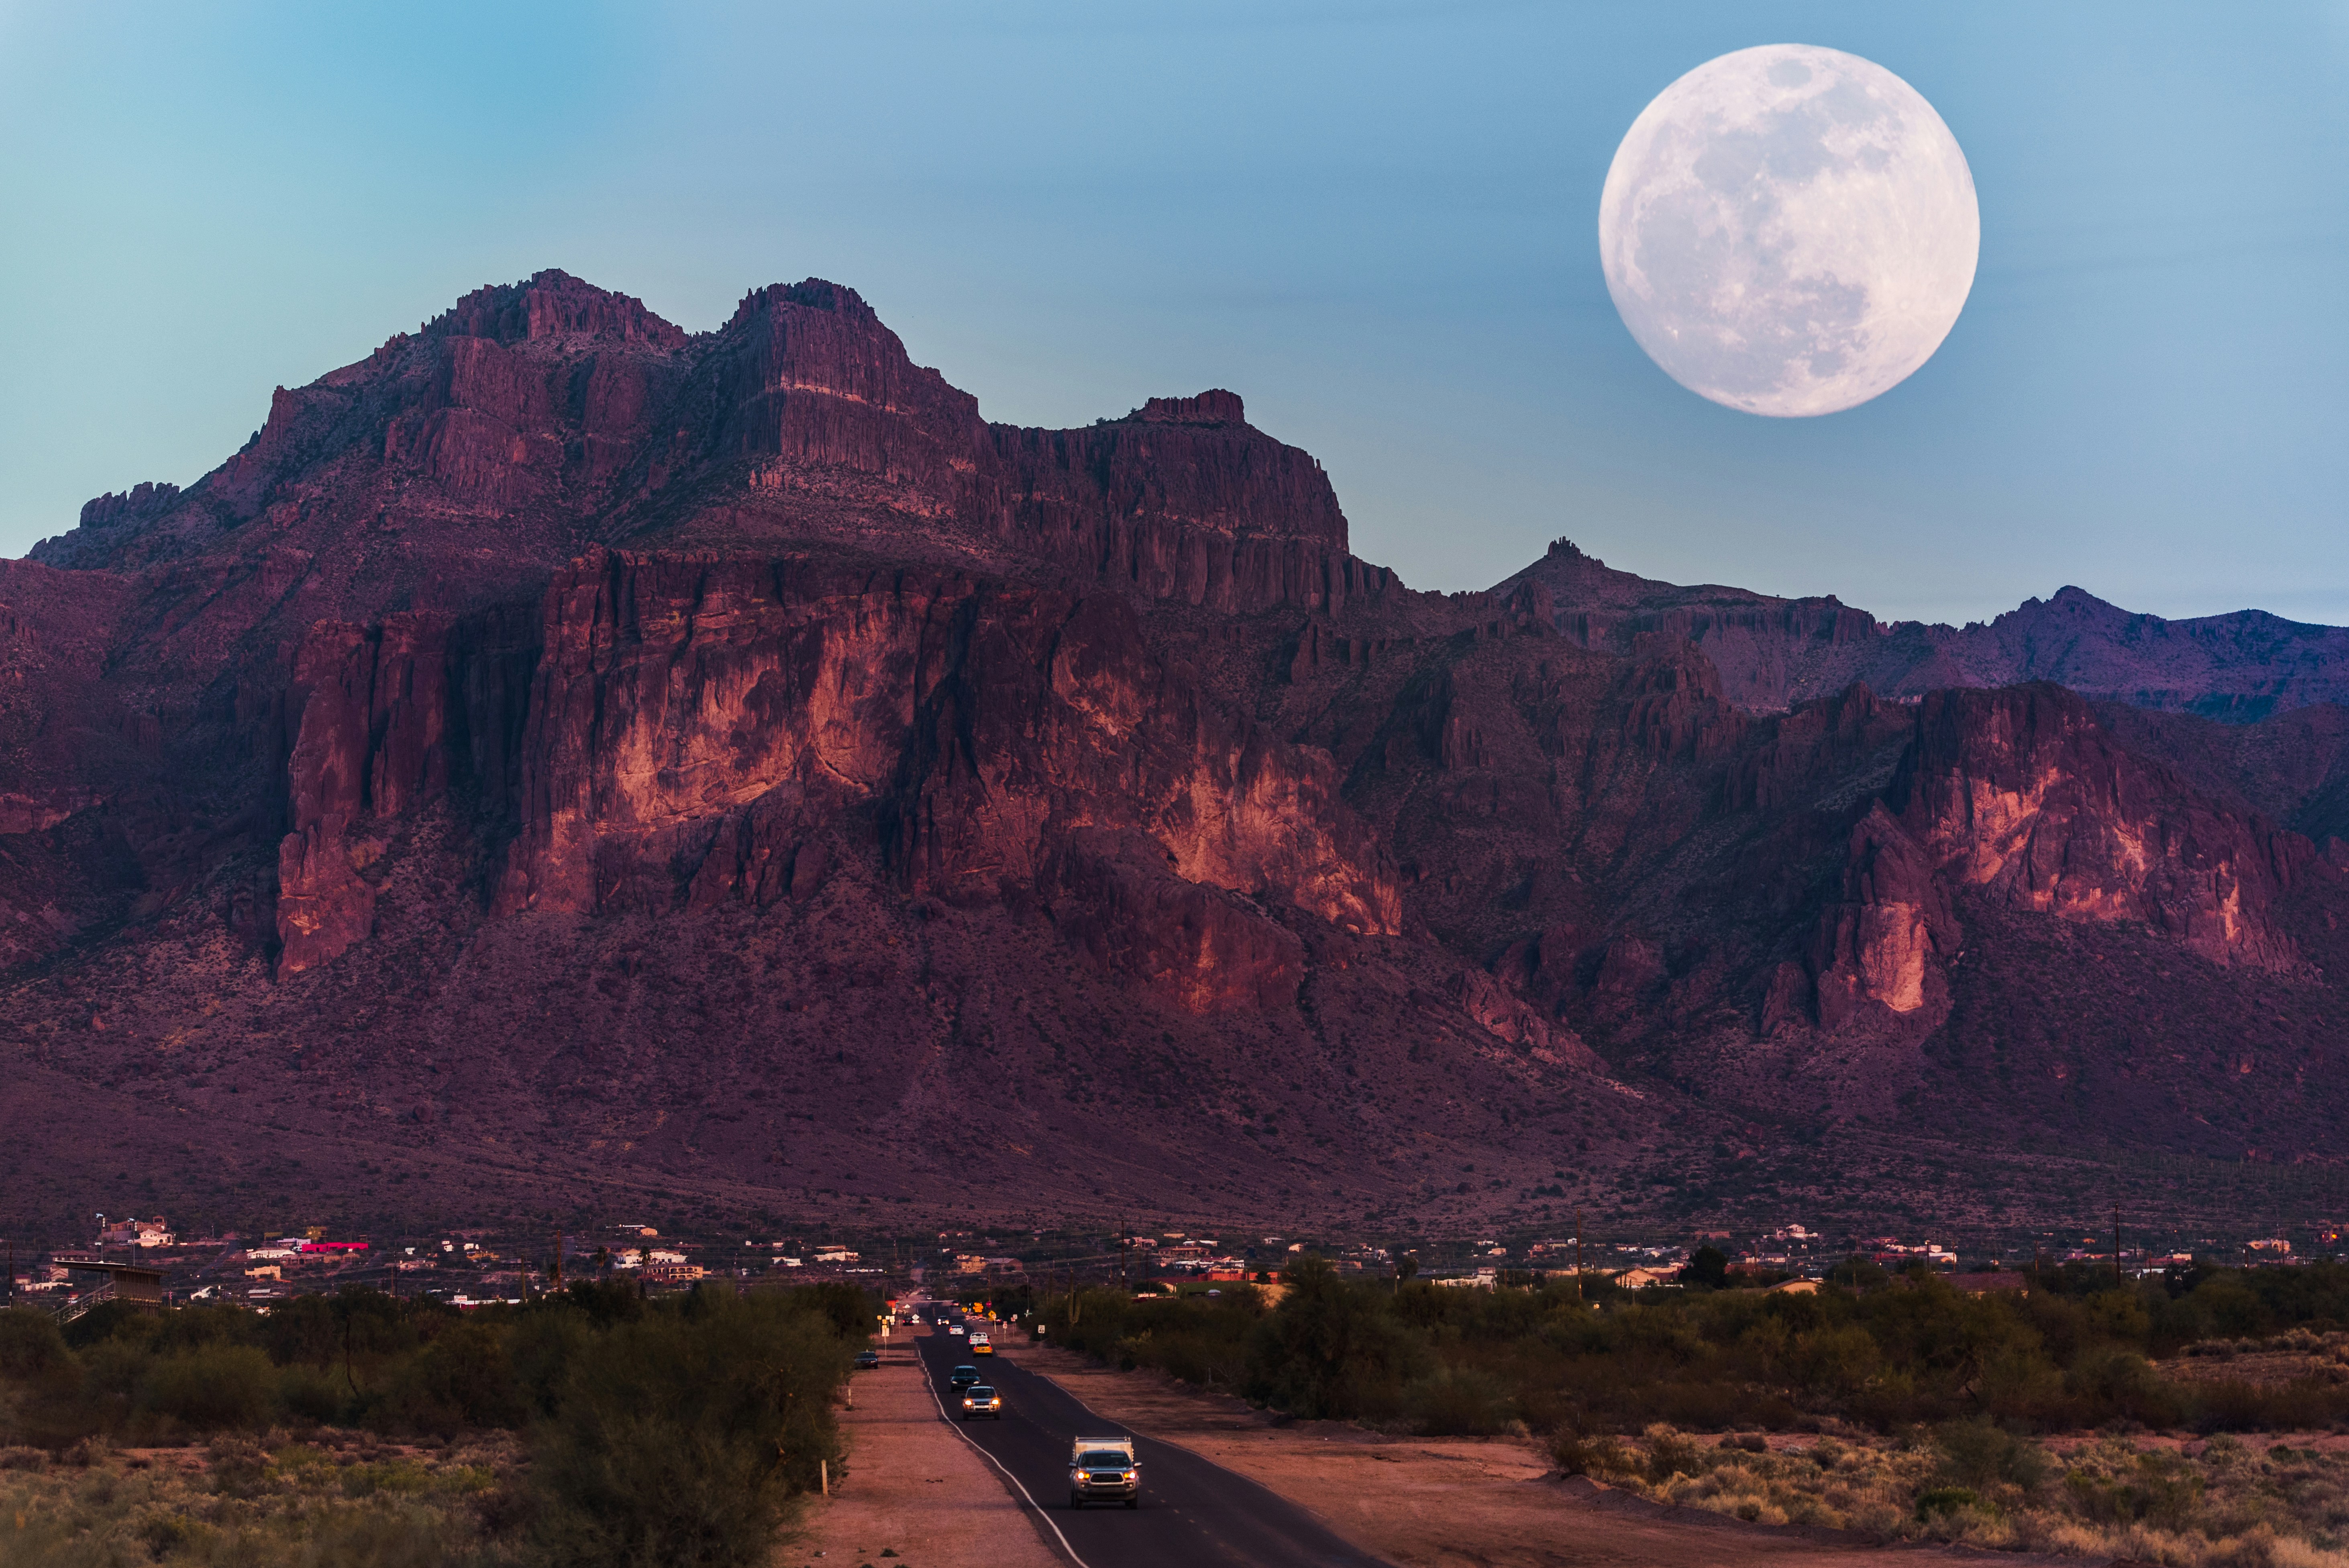 The Supermoon rises above the Superstition Mountains in Arizona on January 30, 2018.